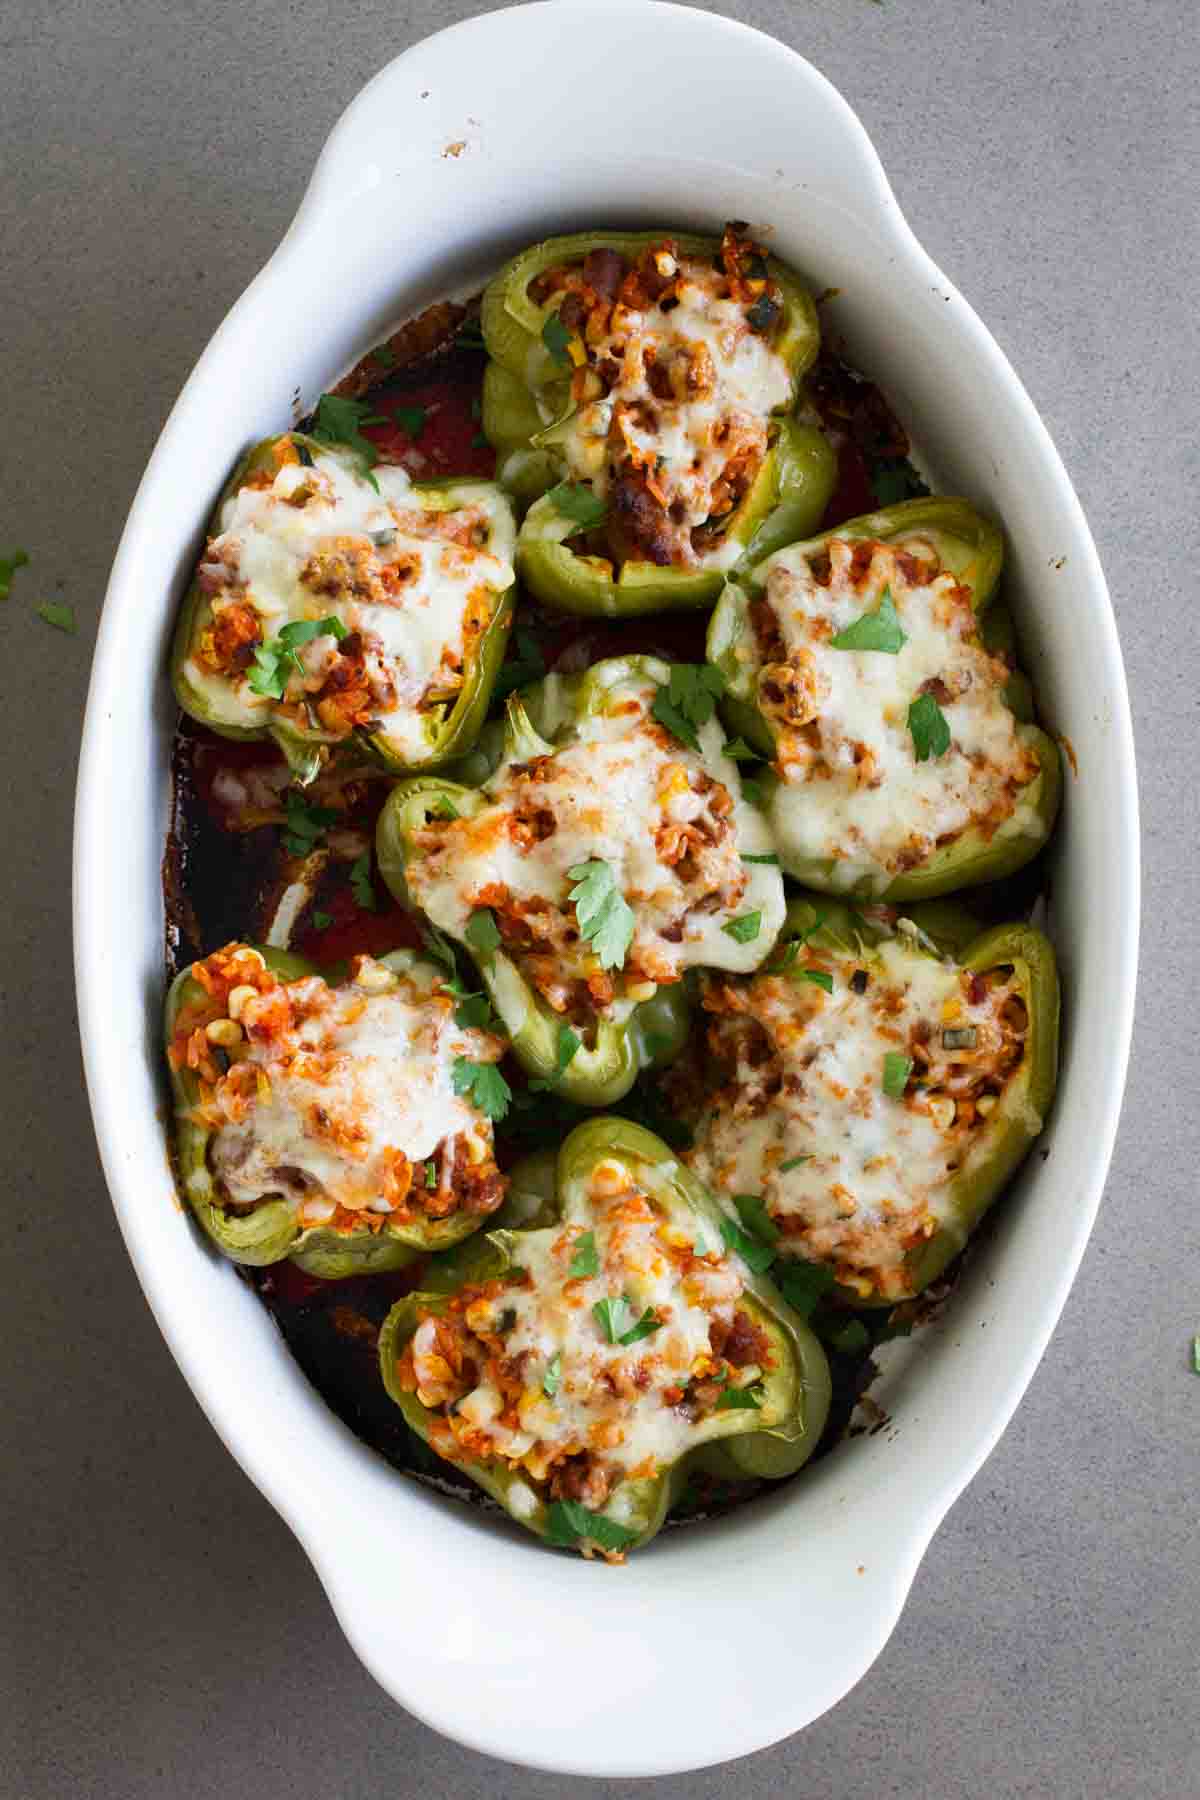 Baking dish full of Vegetable and Sausage Stuffed Peppers